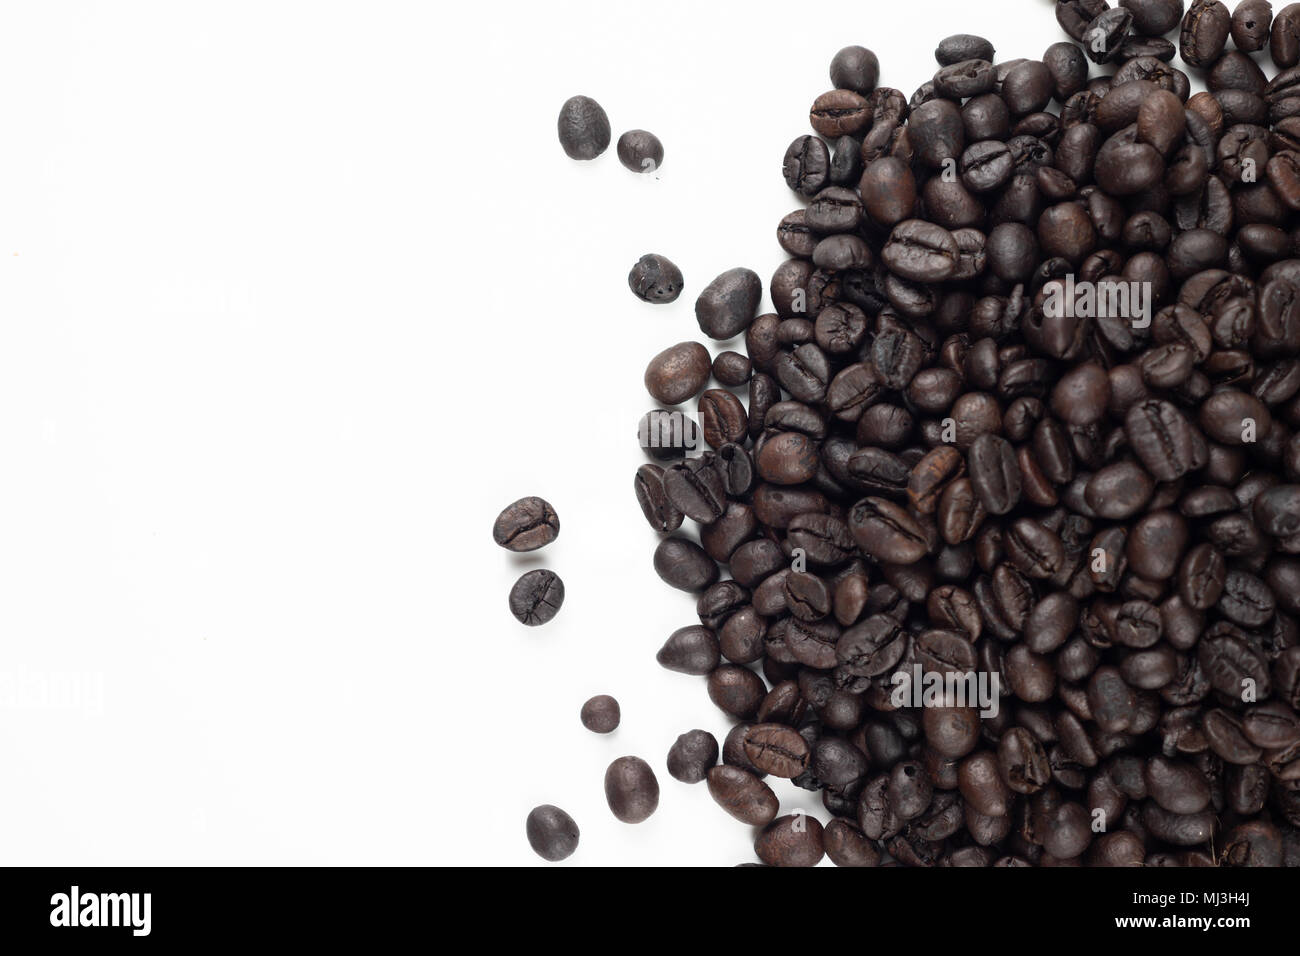 Roasted coffee beans on white background. Select focus shallow depth of field with copy space Stock Photo